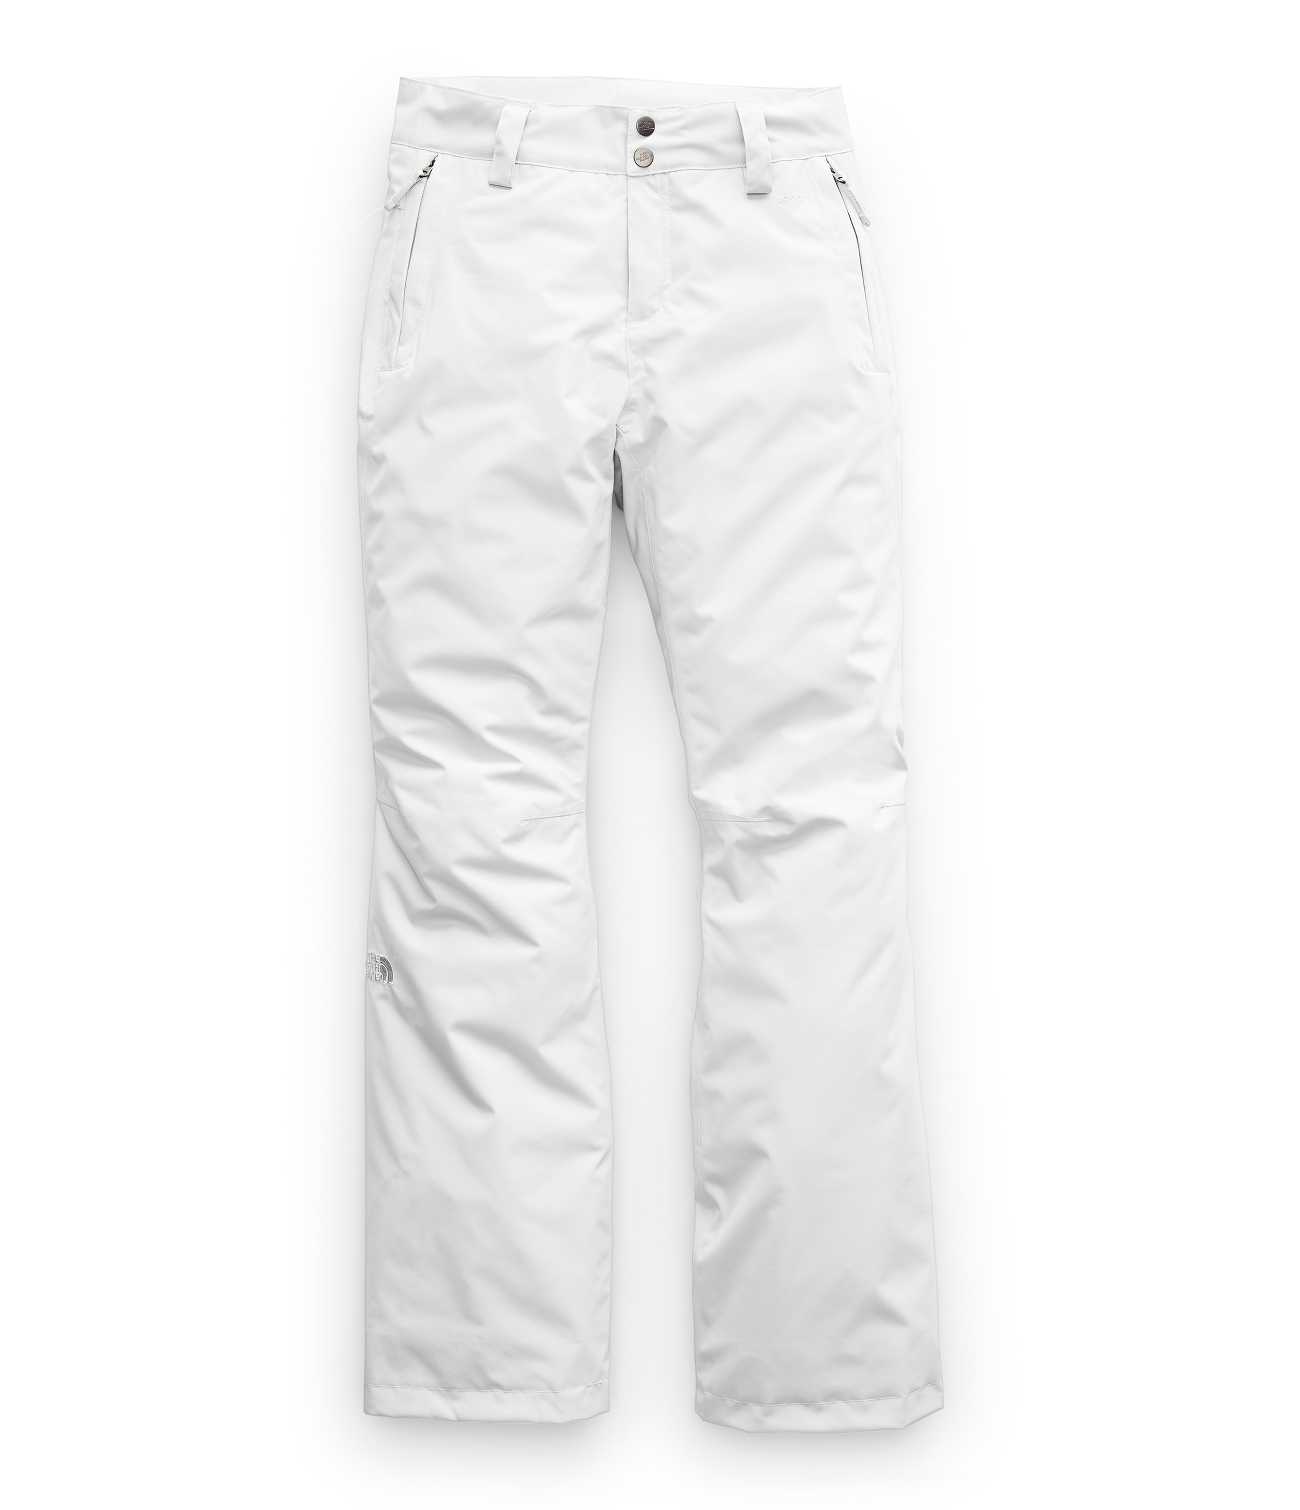  THE NORTH FACE Women's Sally Insulated Snow Pants, Shady Blue,  X-Small Regular : Clothing, Shoes & Jewelry